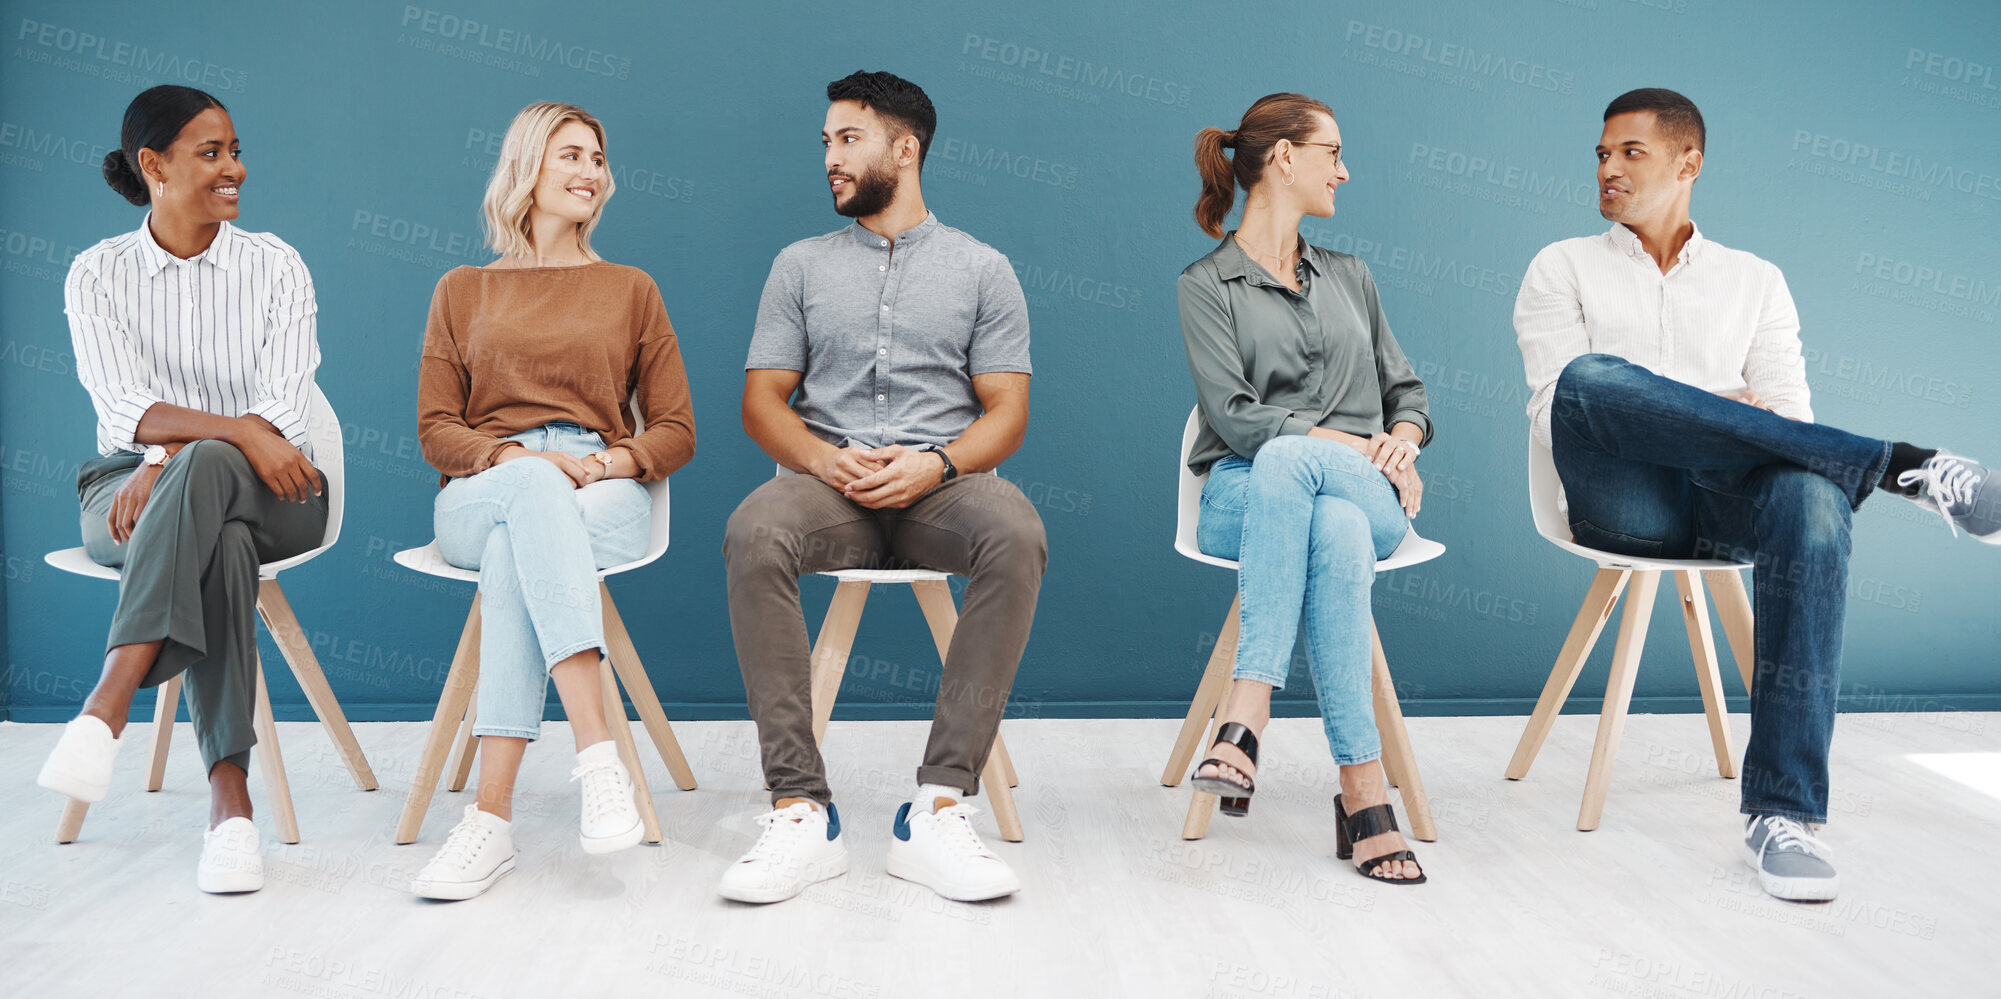 Buy stock photo Interview queue, business people and talk by wall with smile, diversity and waiting room for hr recruitment. Men, women and happy together for interview, human resources and hiring for job at startup